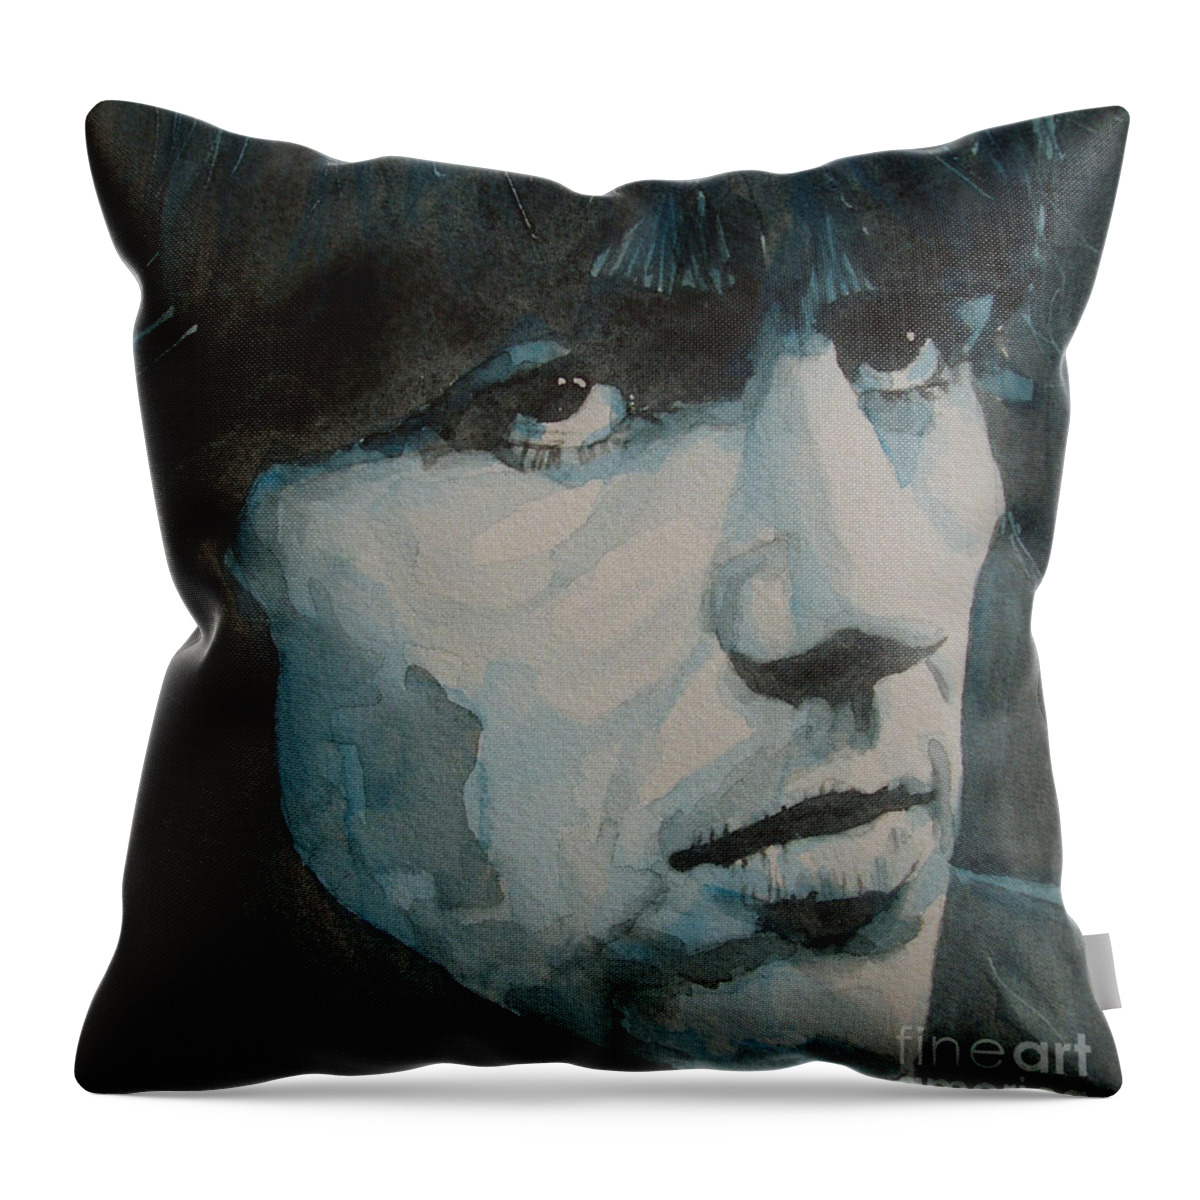 The Beatles Throw Pillow featuring the painting The quiet one by Paul Lovering